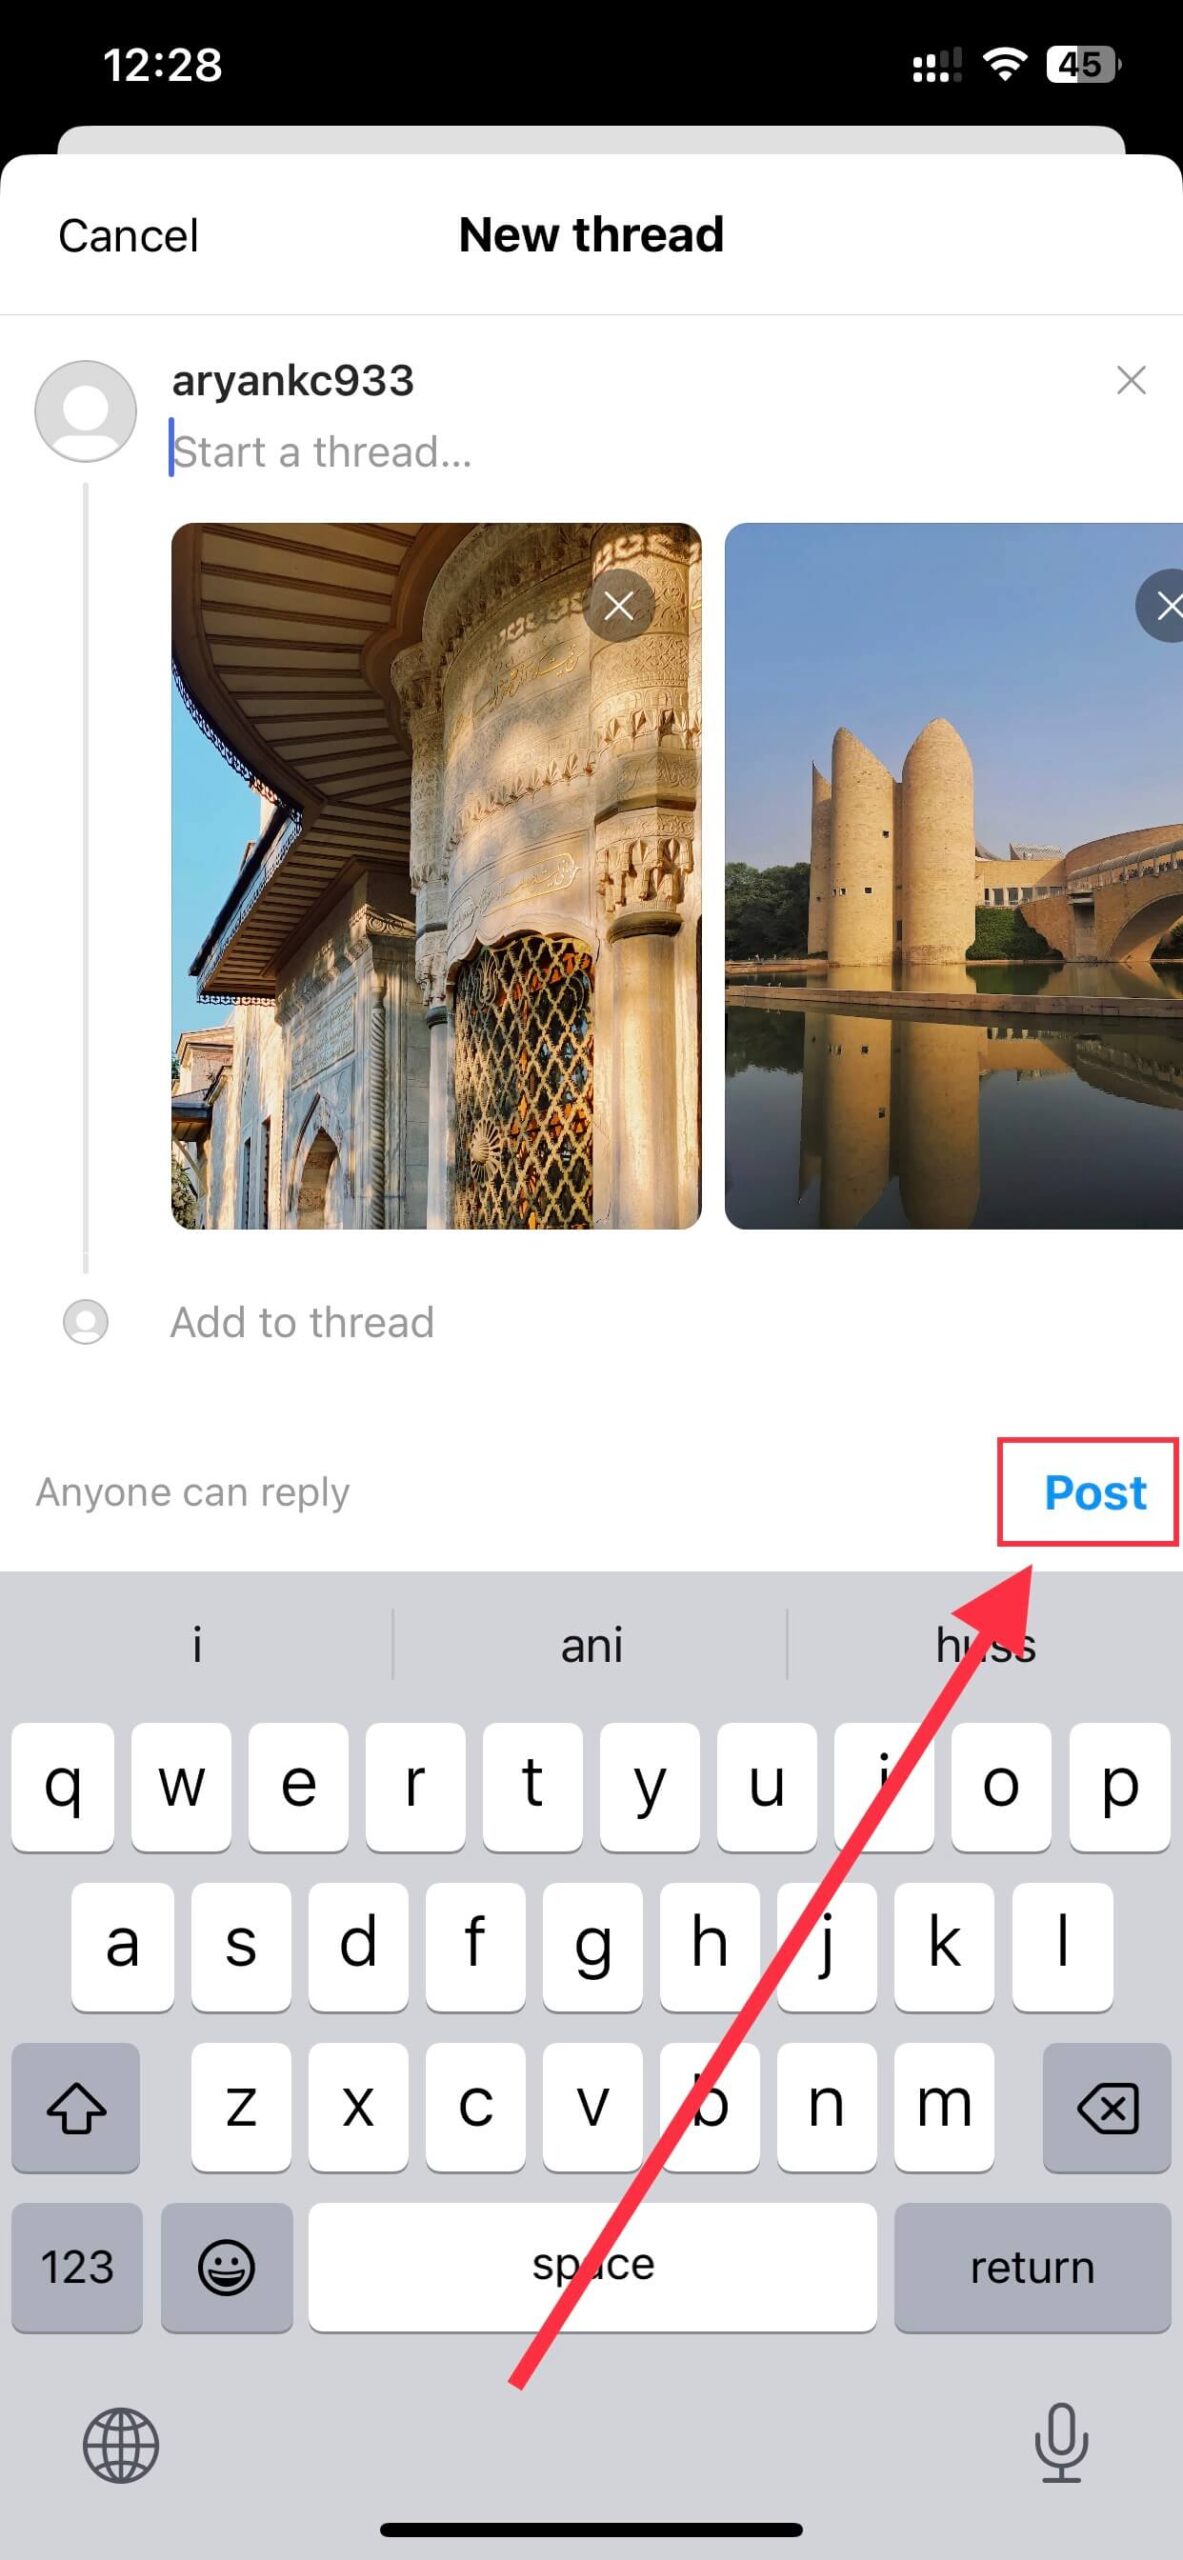 tap on post button